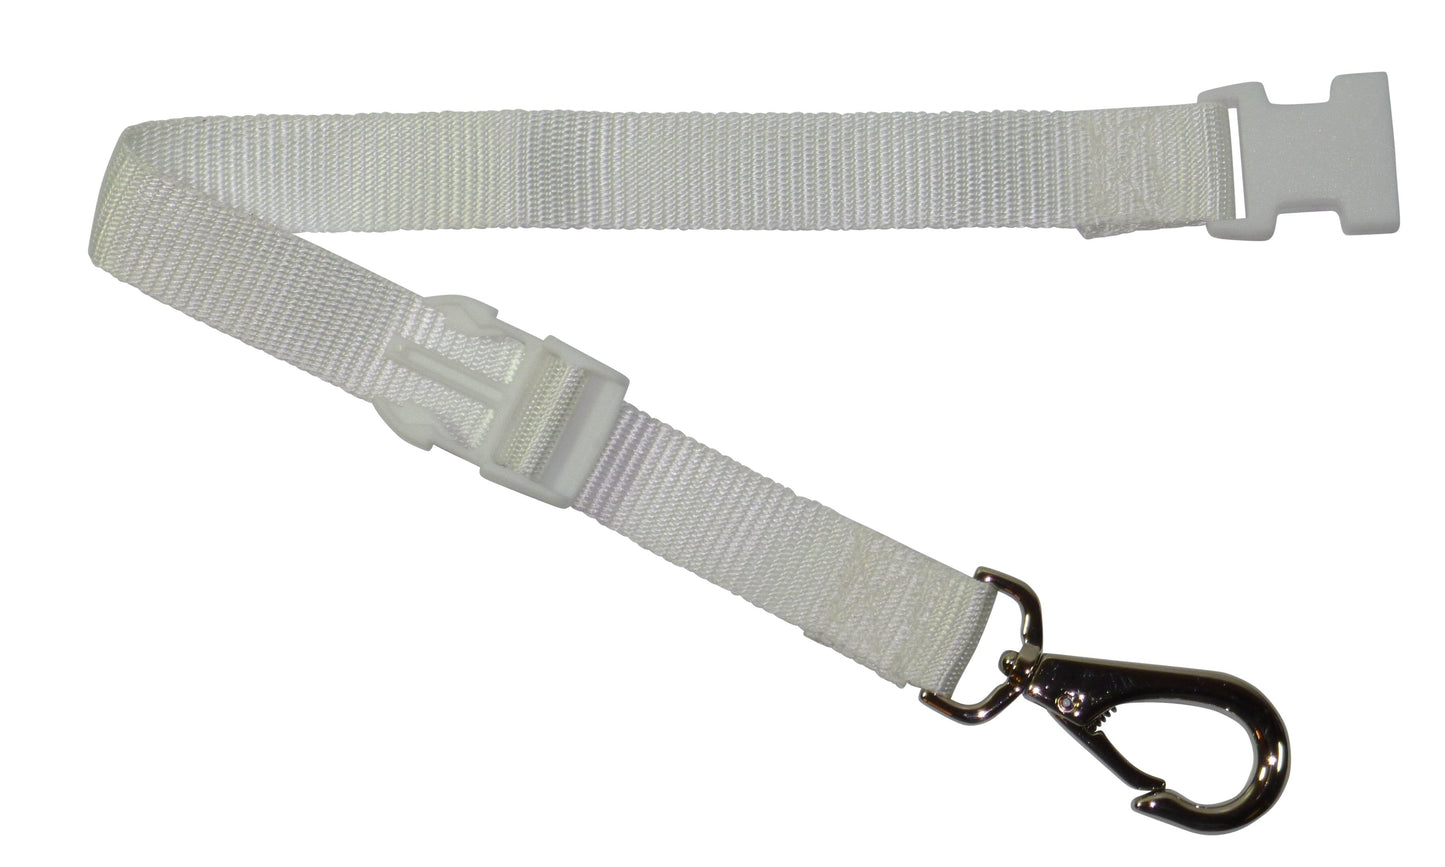 Benristraps Bag Support Strap, Pack of 2 Straps in white